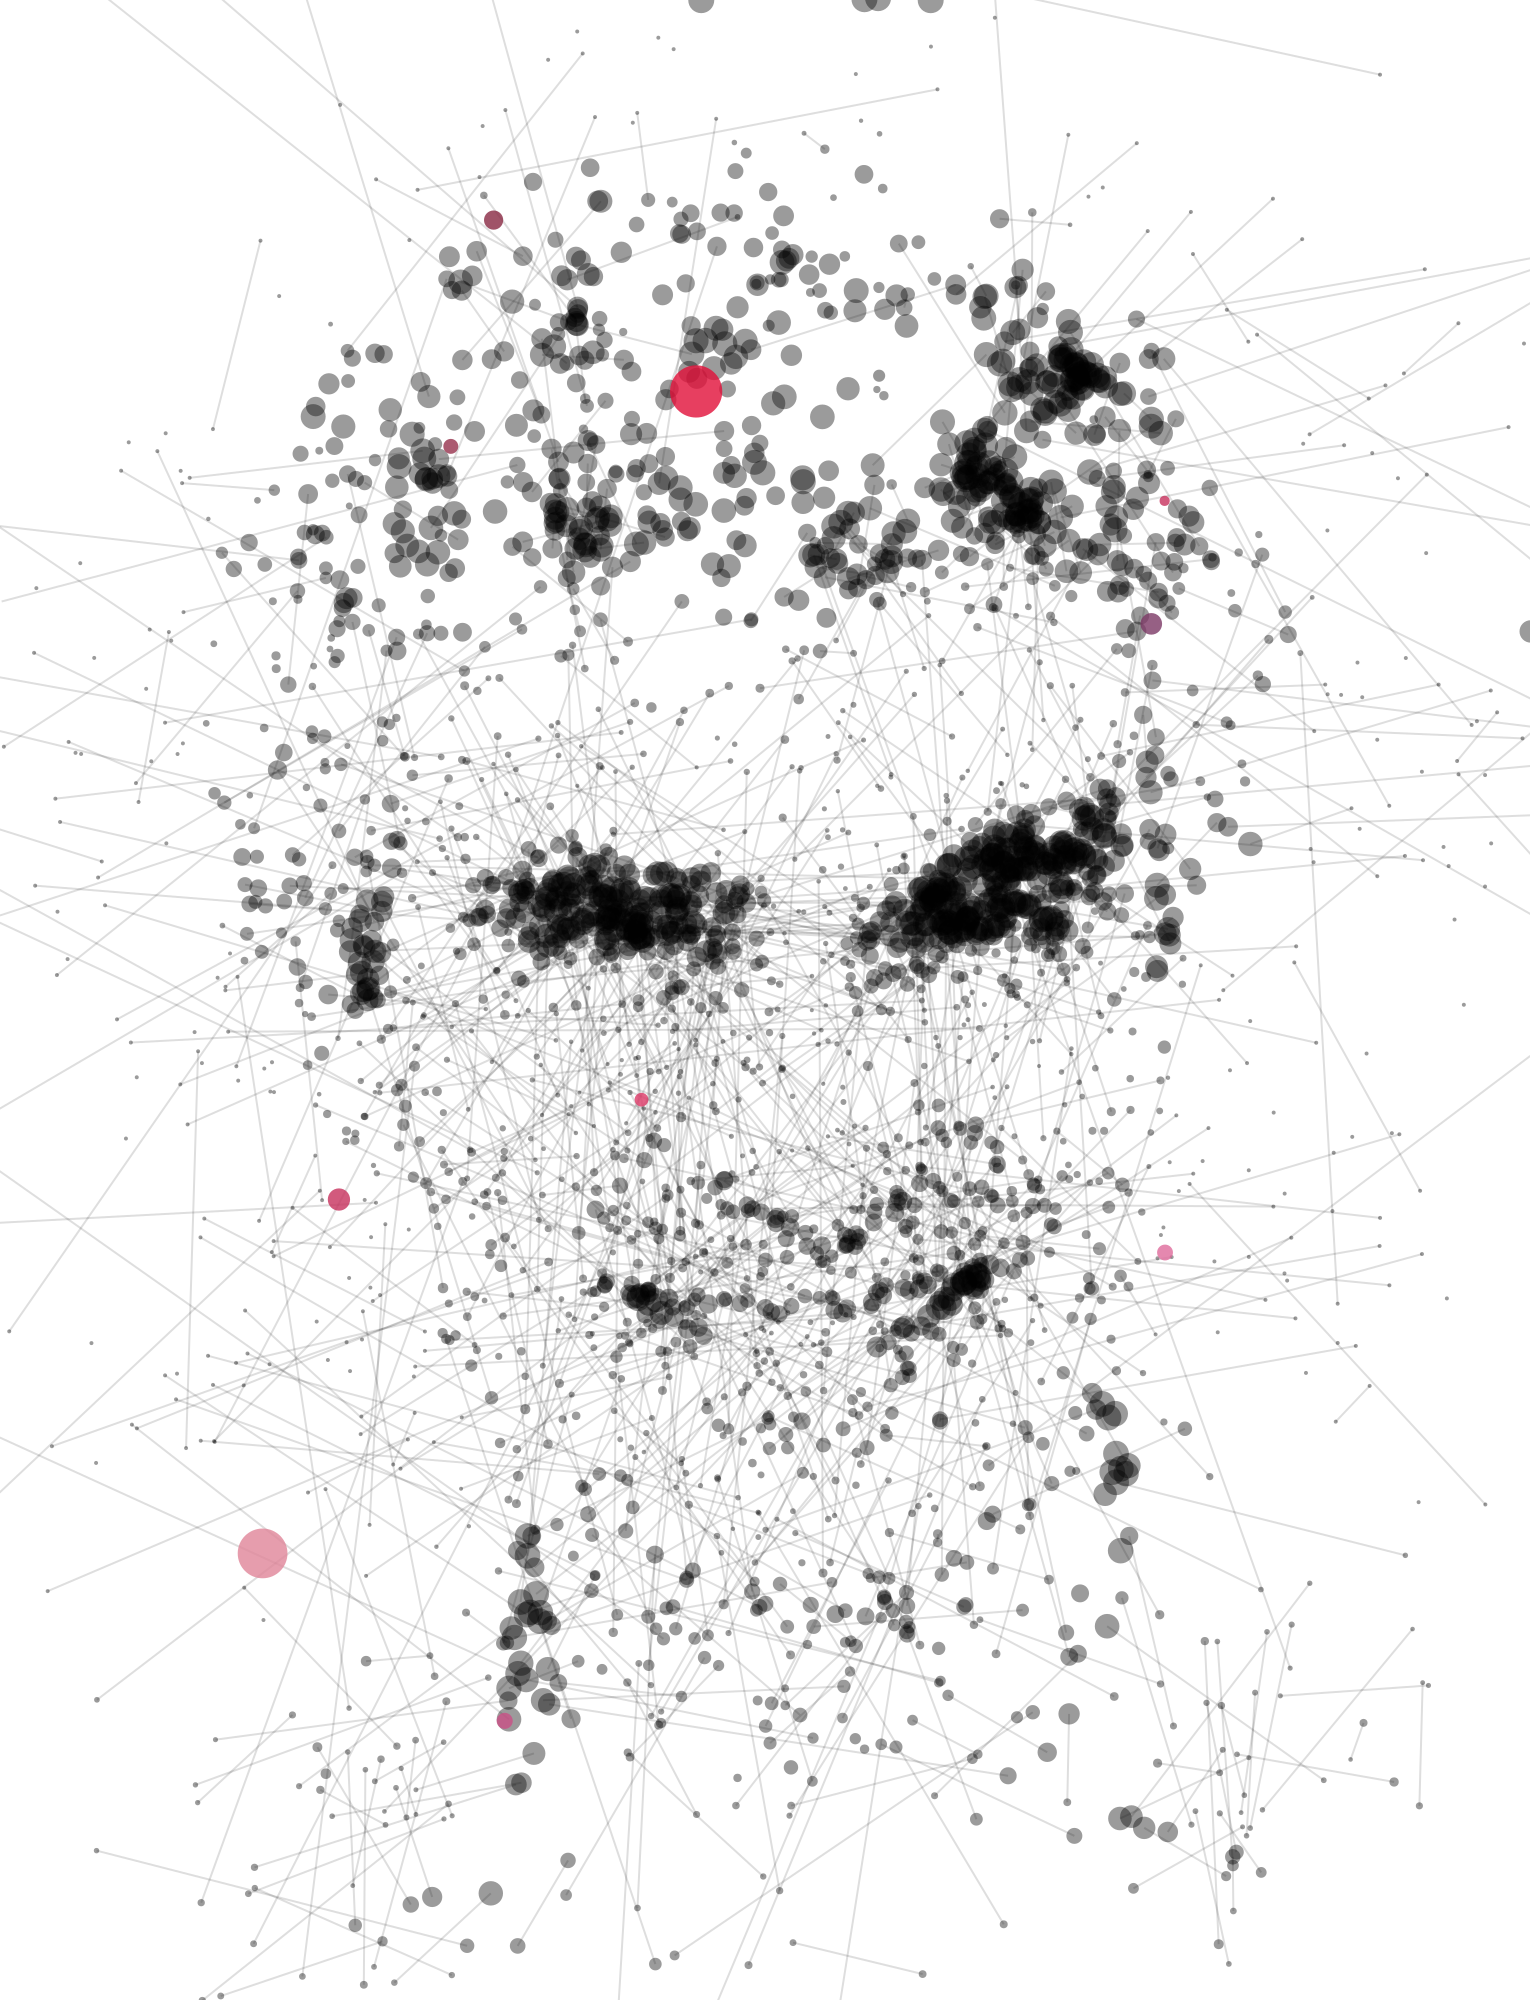 Illustration of Yoshua Bengio made of dots and lines.